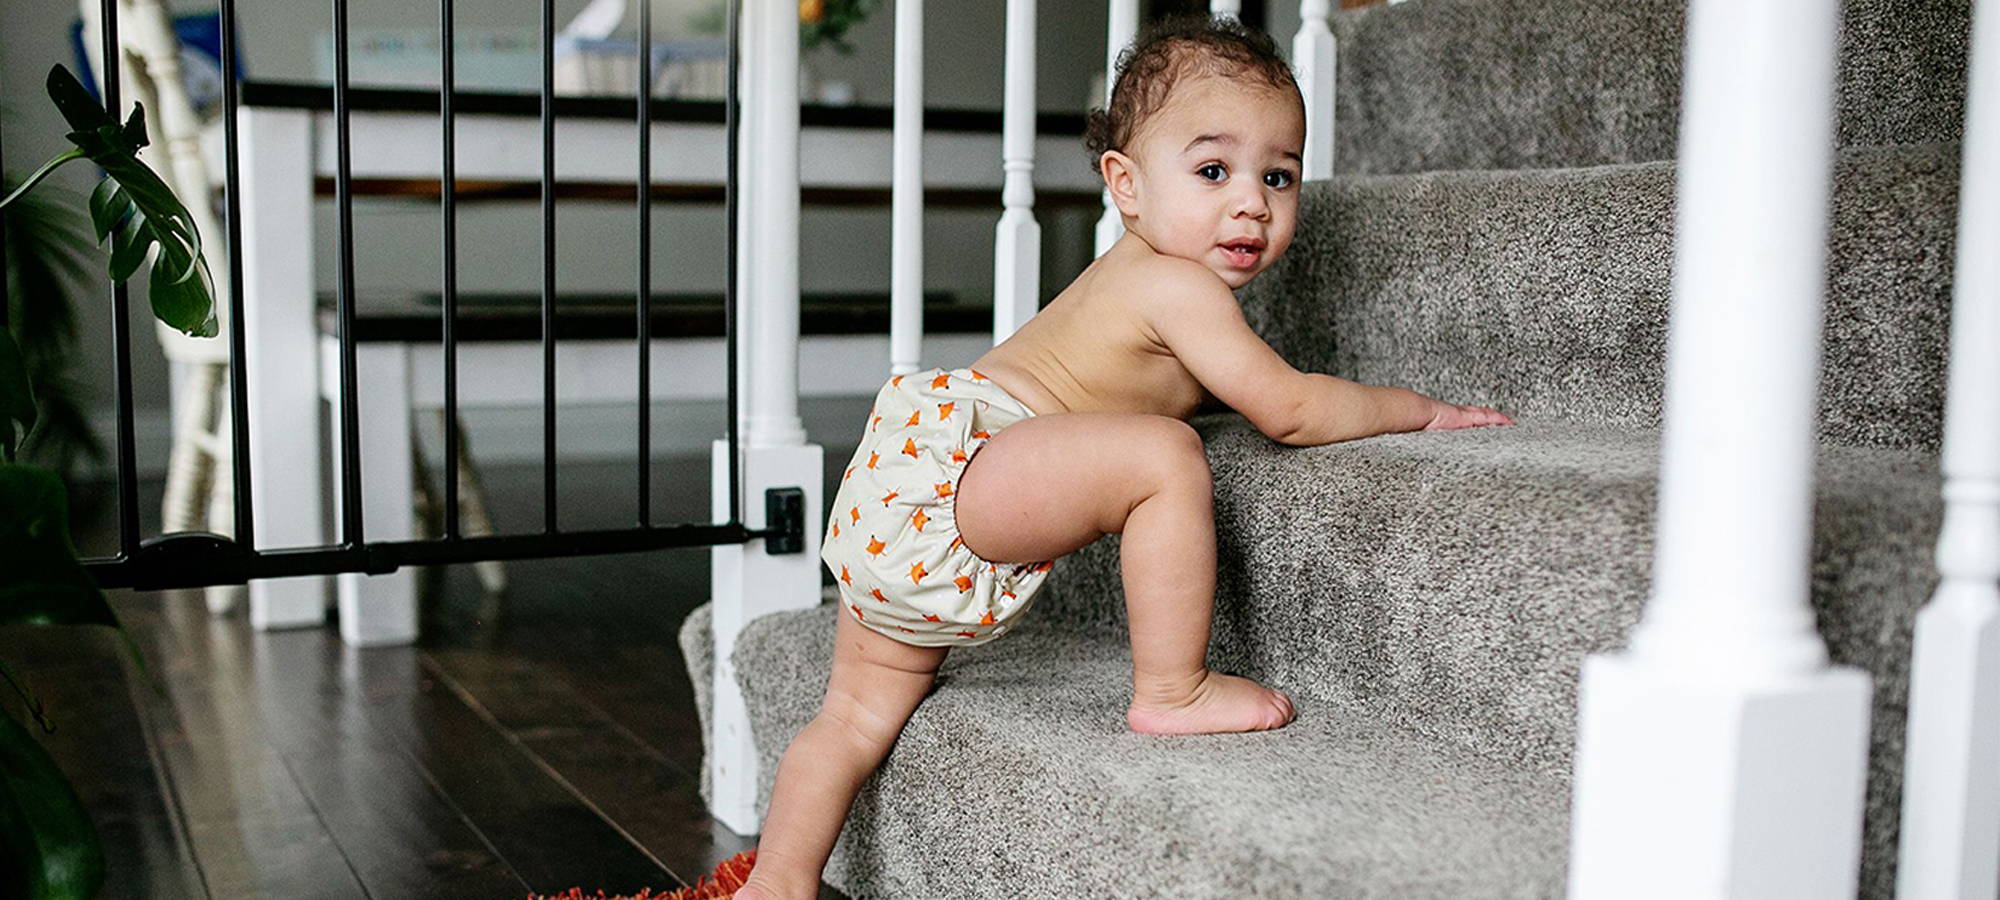 Baby crawling up the stairs in his Simple Being Cloth Diapers, looking confident and comfortable in his stylish reusable diaper.